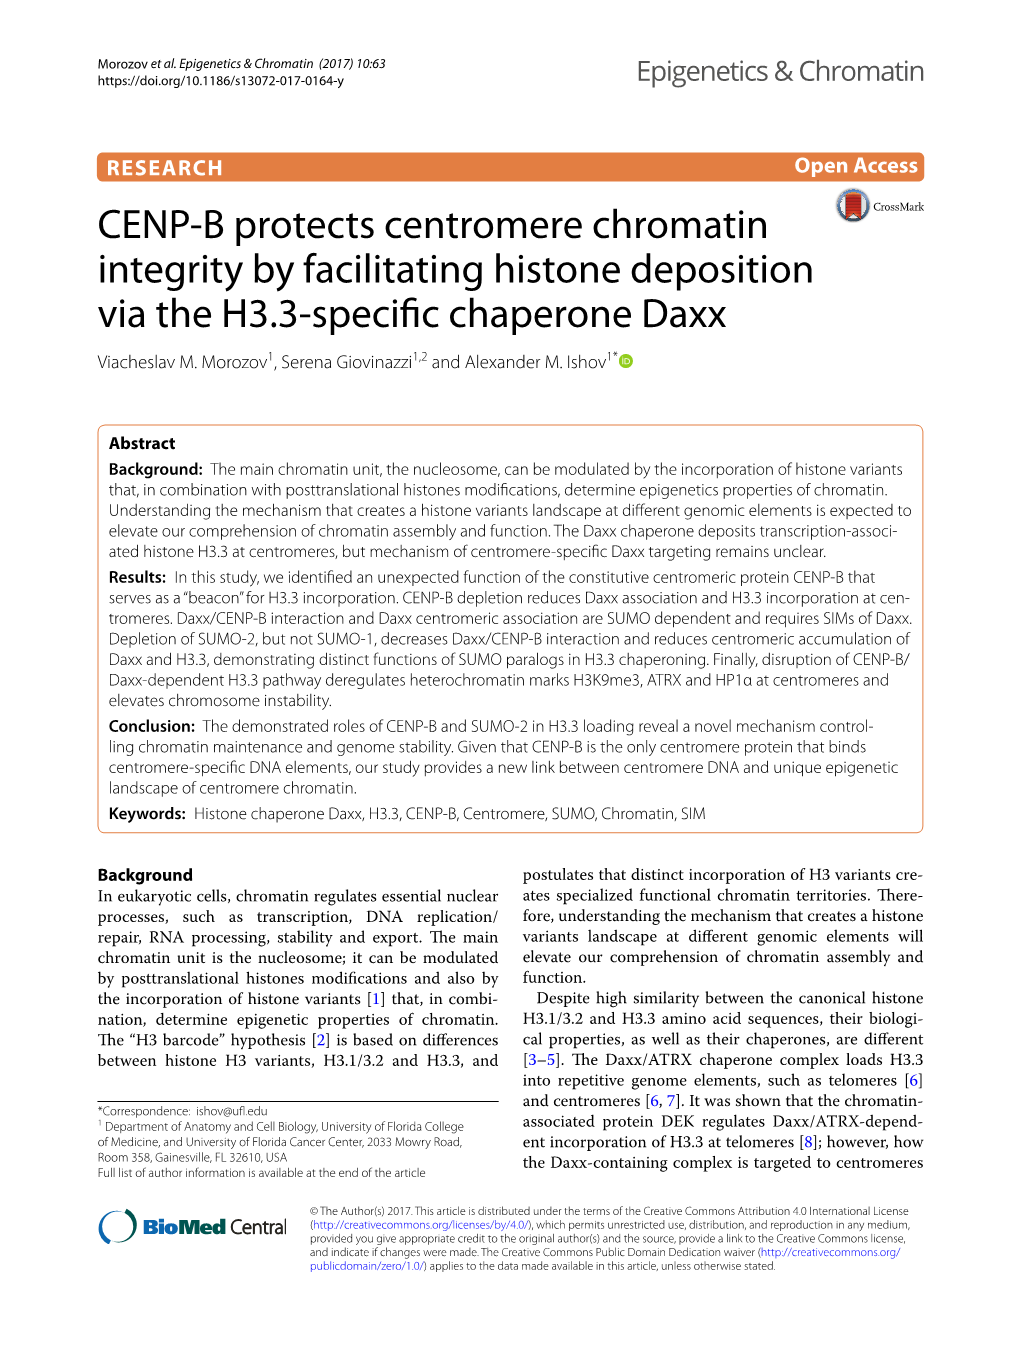 CENP-B Protects Centromere Chromatin Integrity by Facilitating